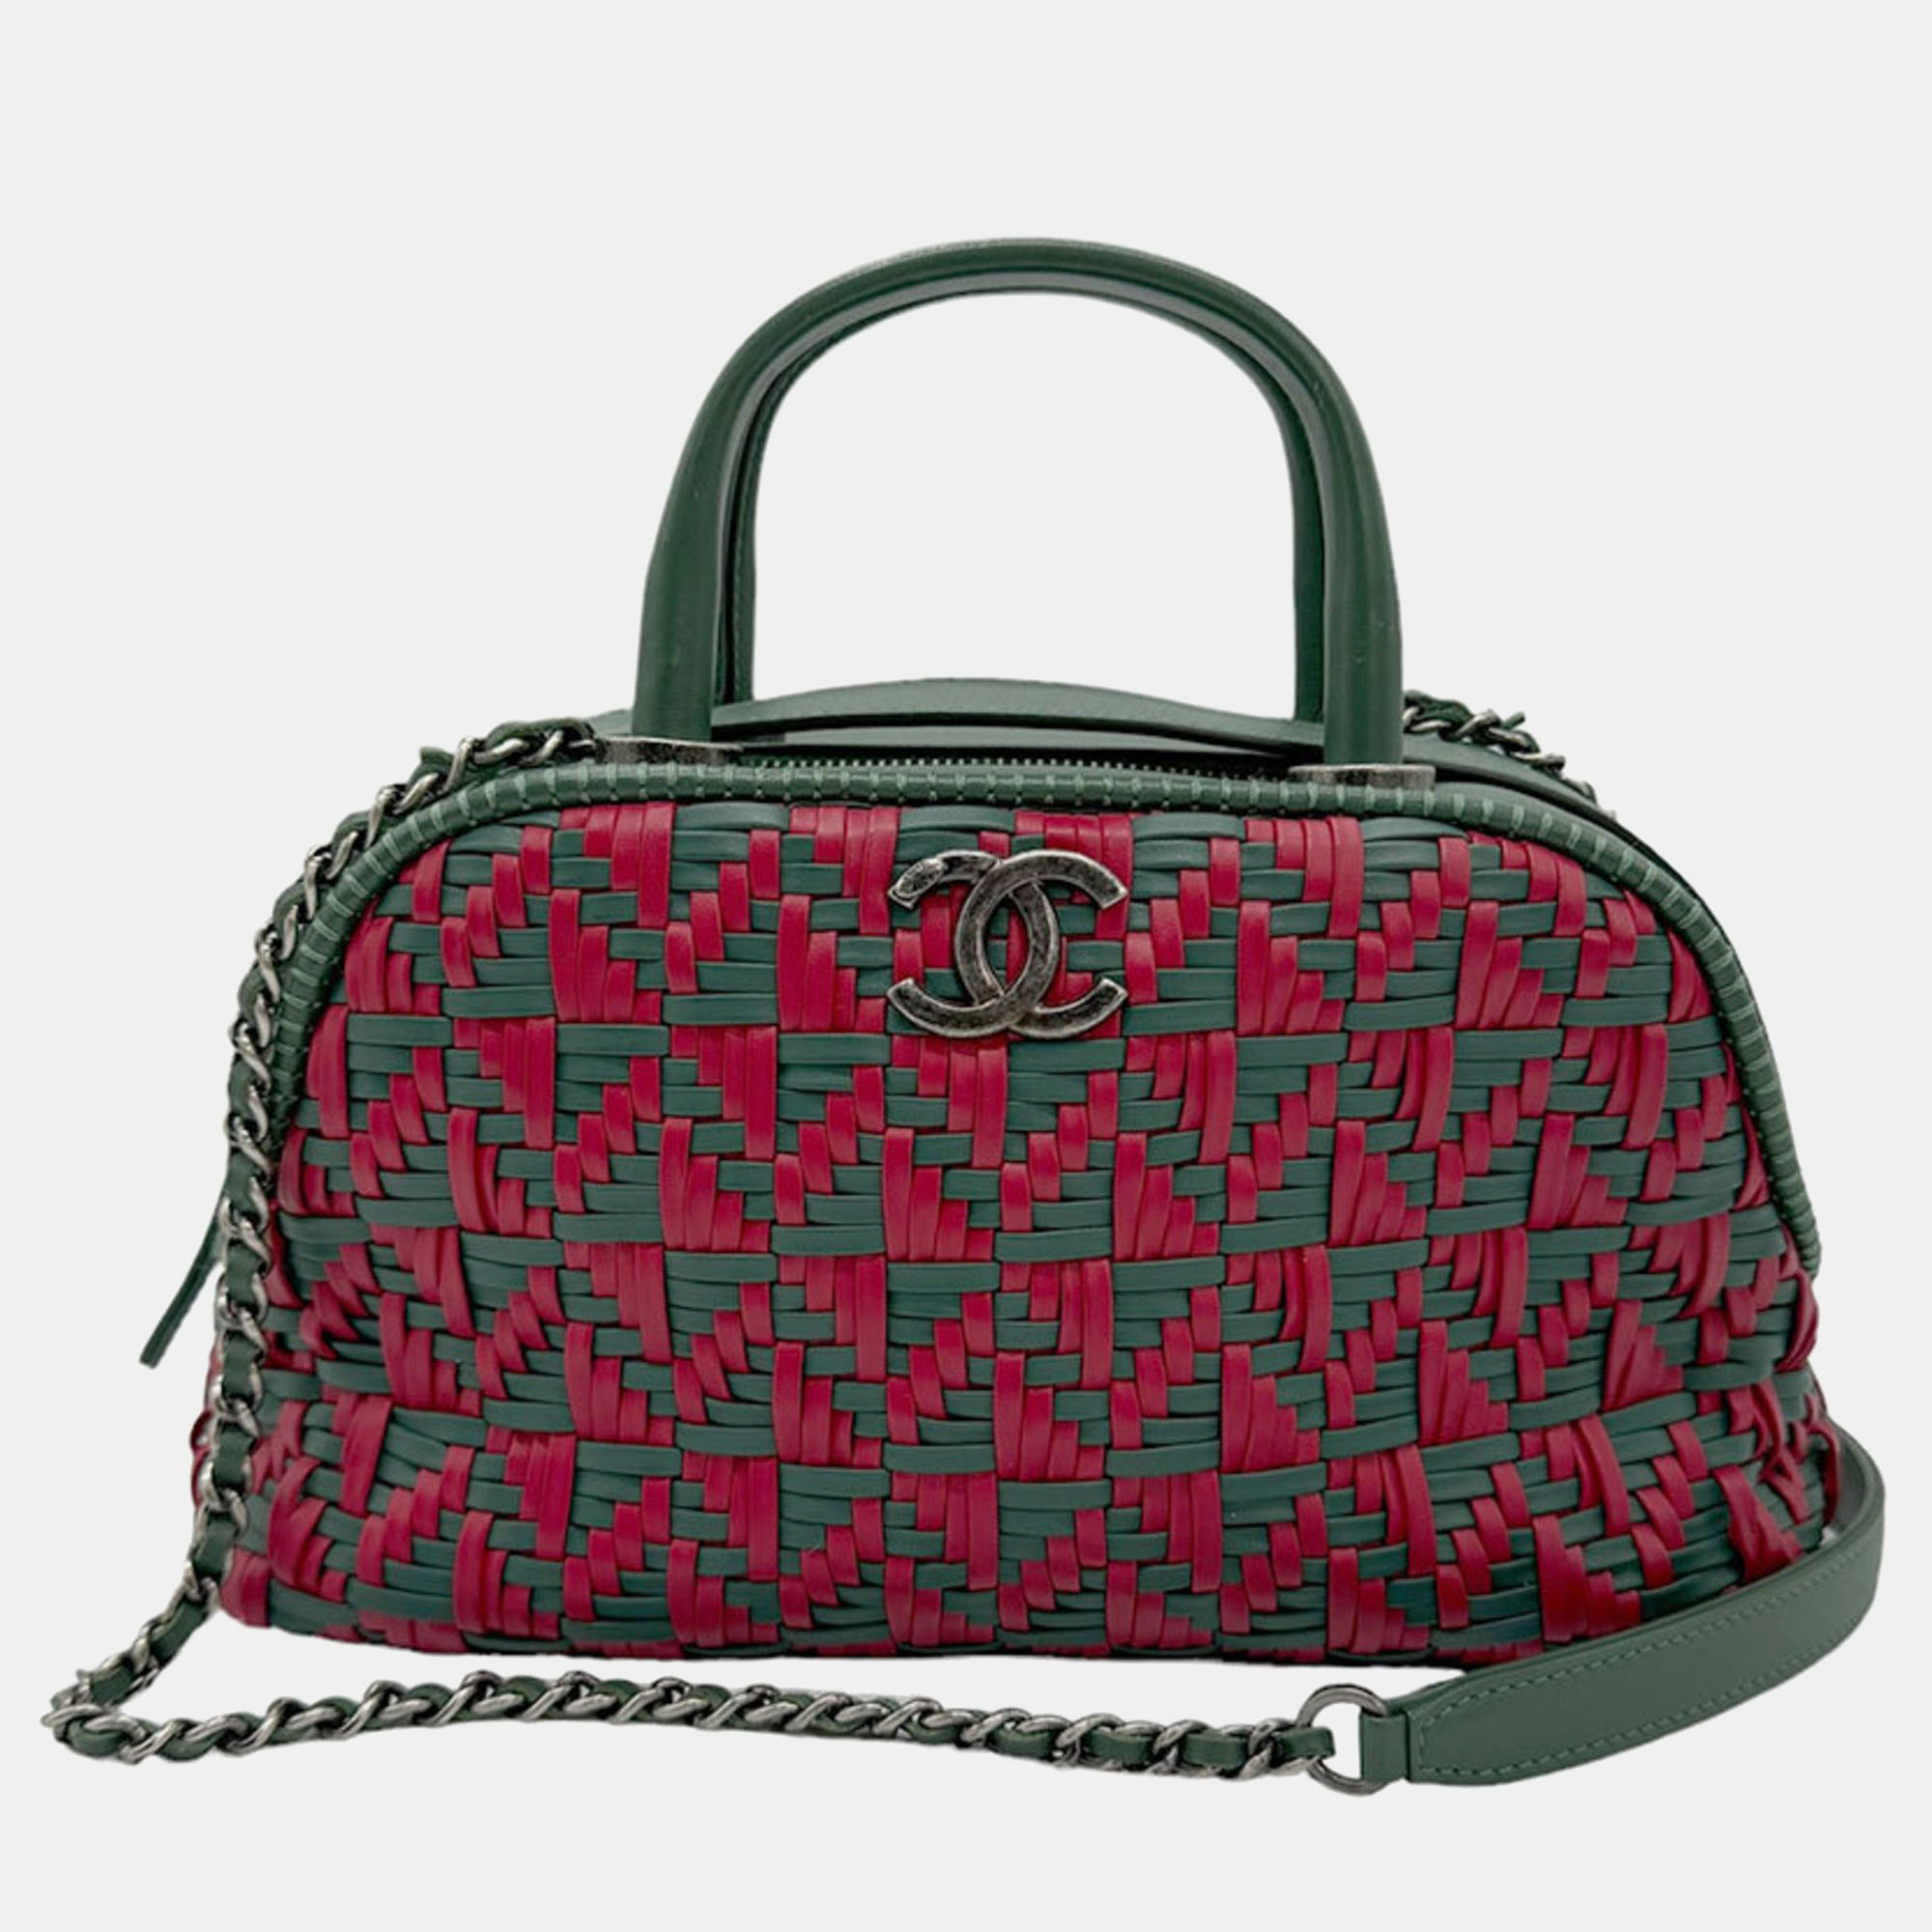 Chanel green/red woven leather bowler bag